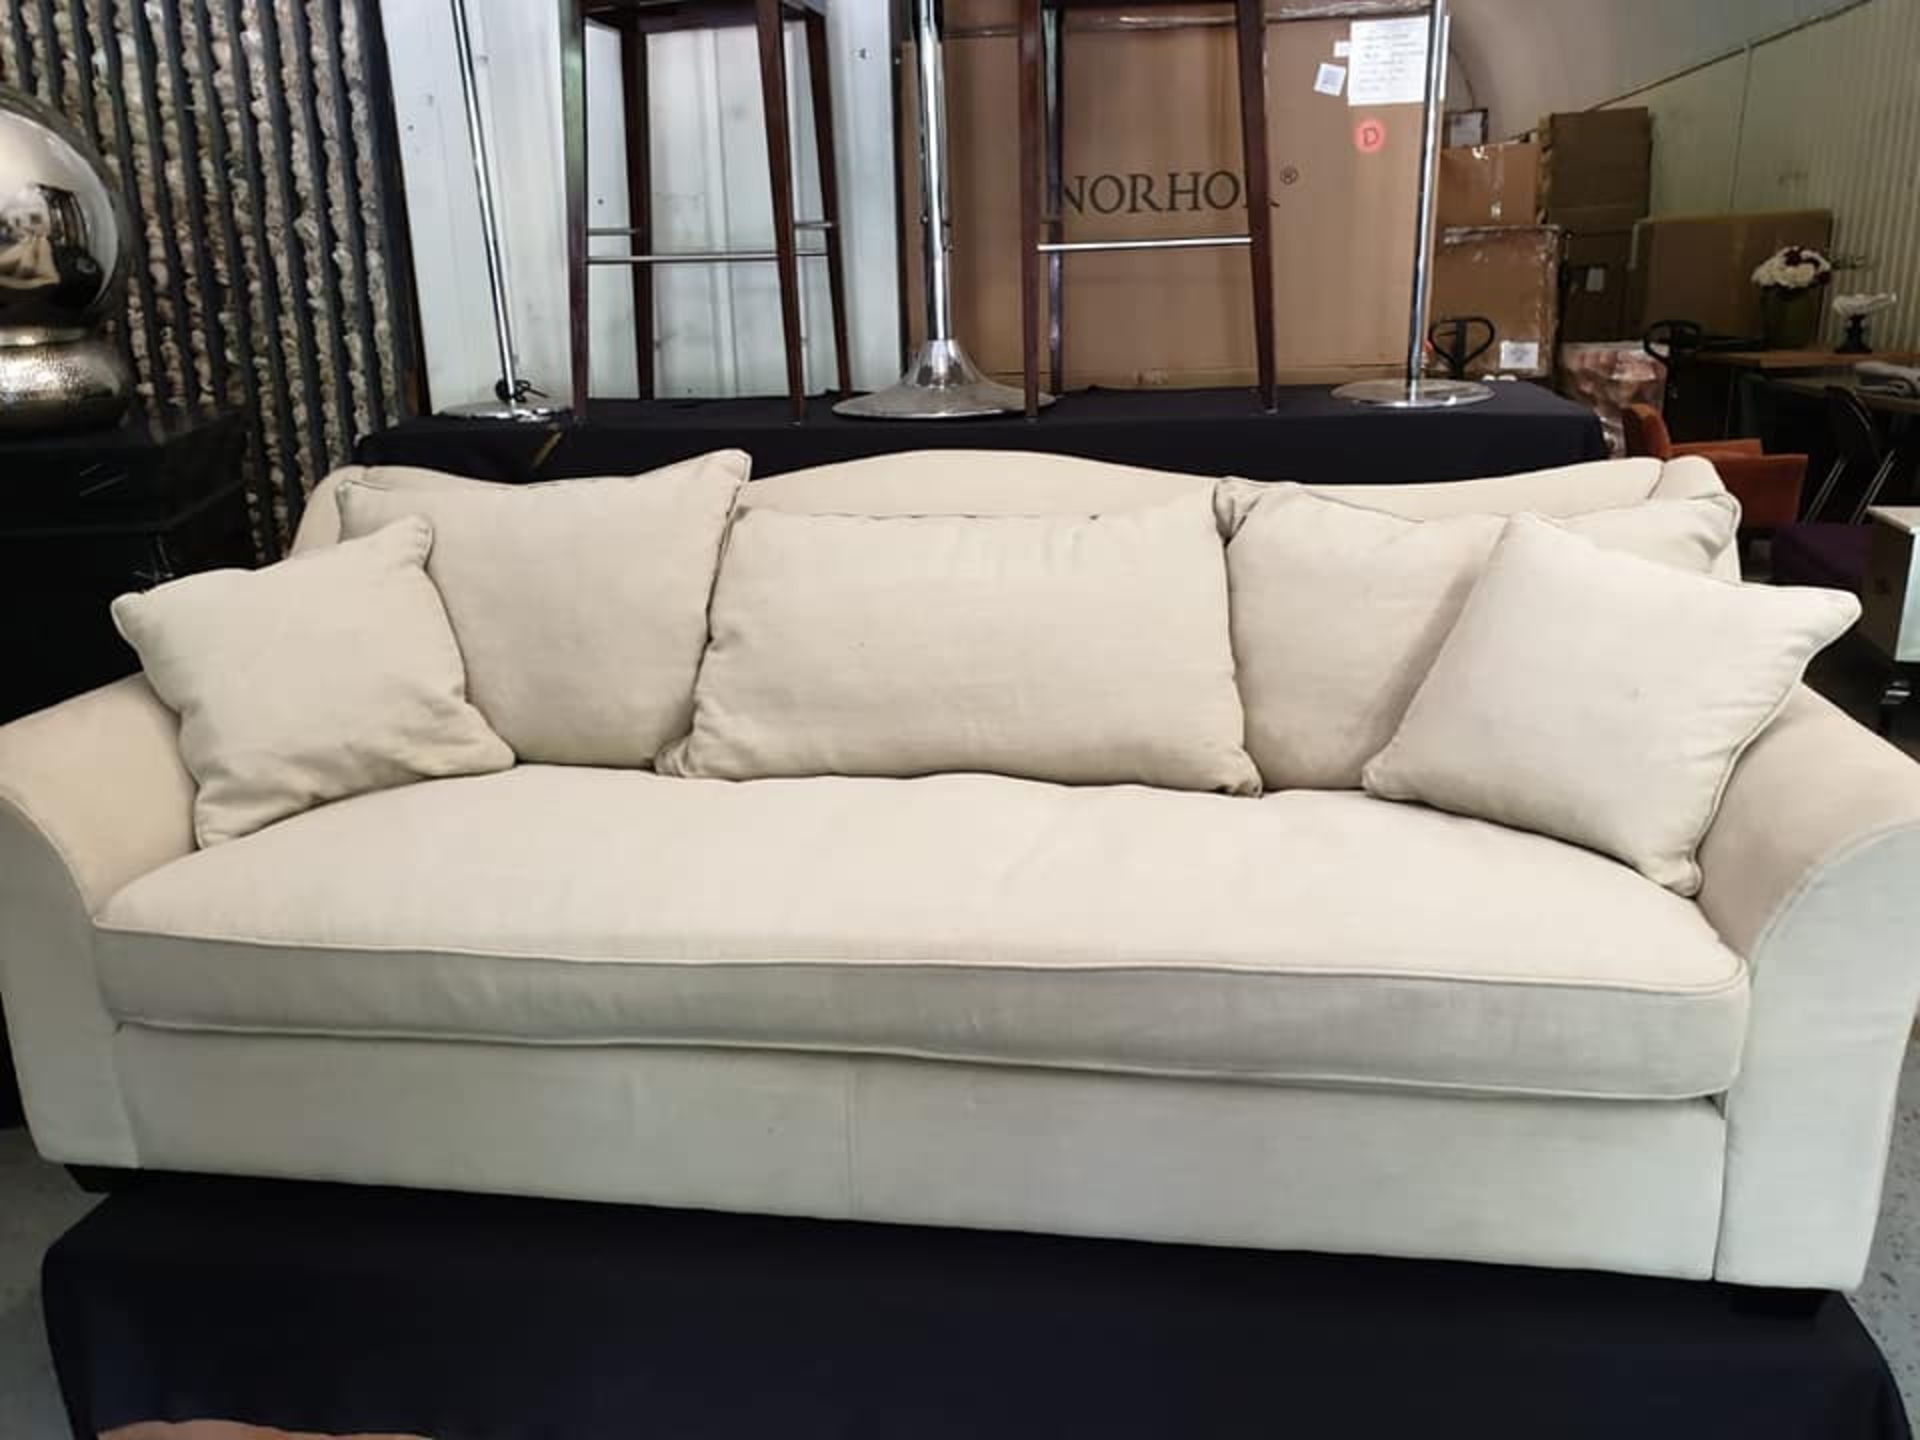 Concerto 3 Seater Upholstered Sofa Scrubbed Lime Stone A Serpentine Back Sofa With Back Loose